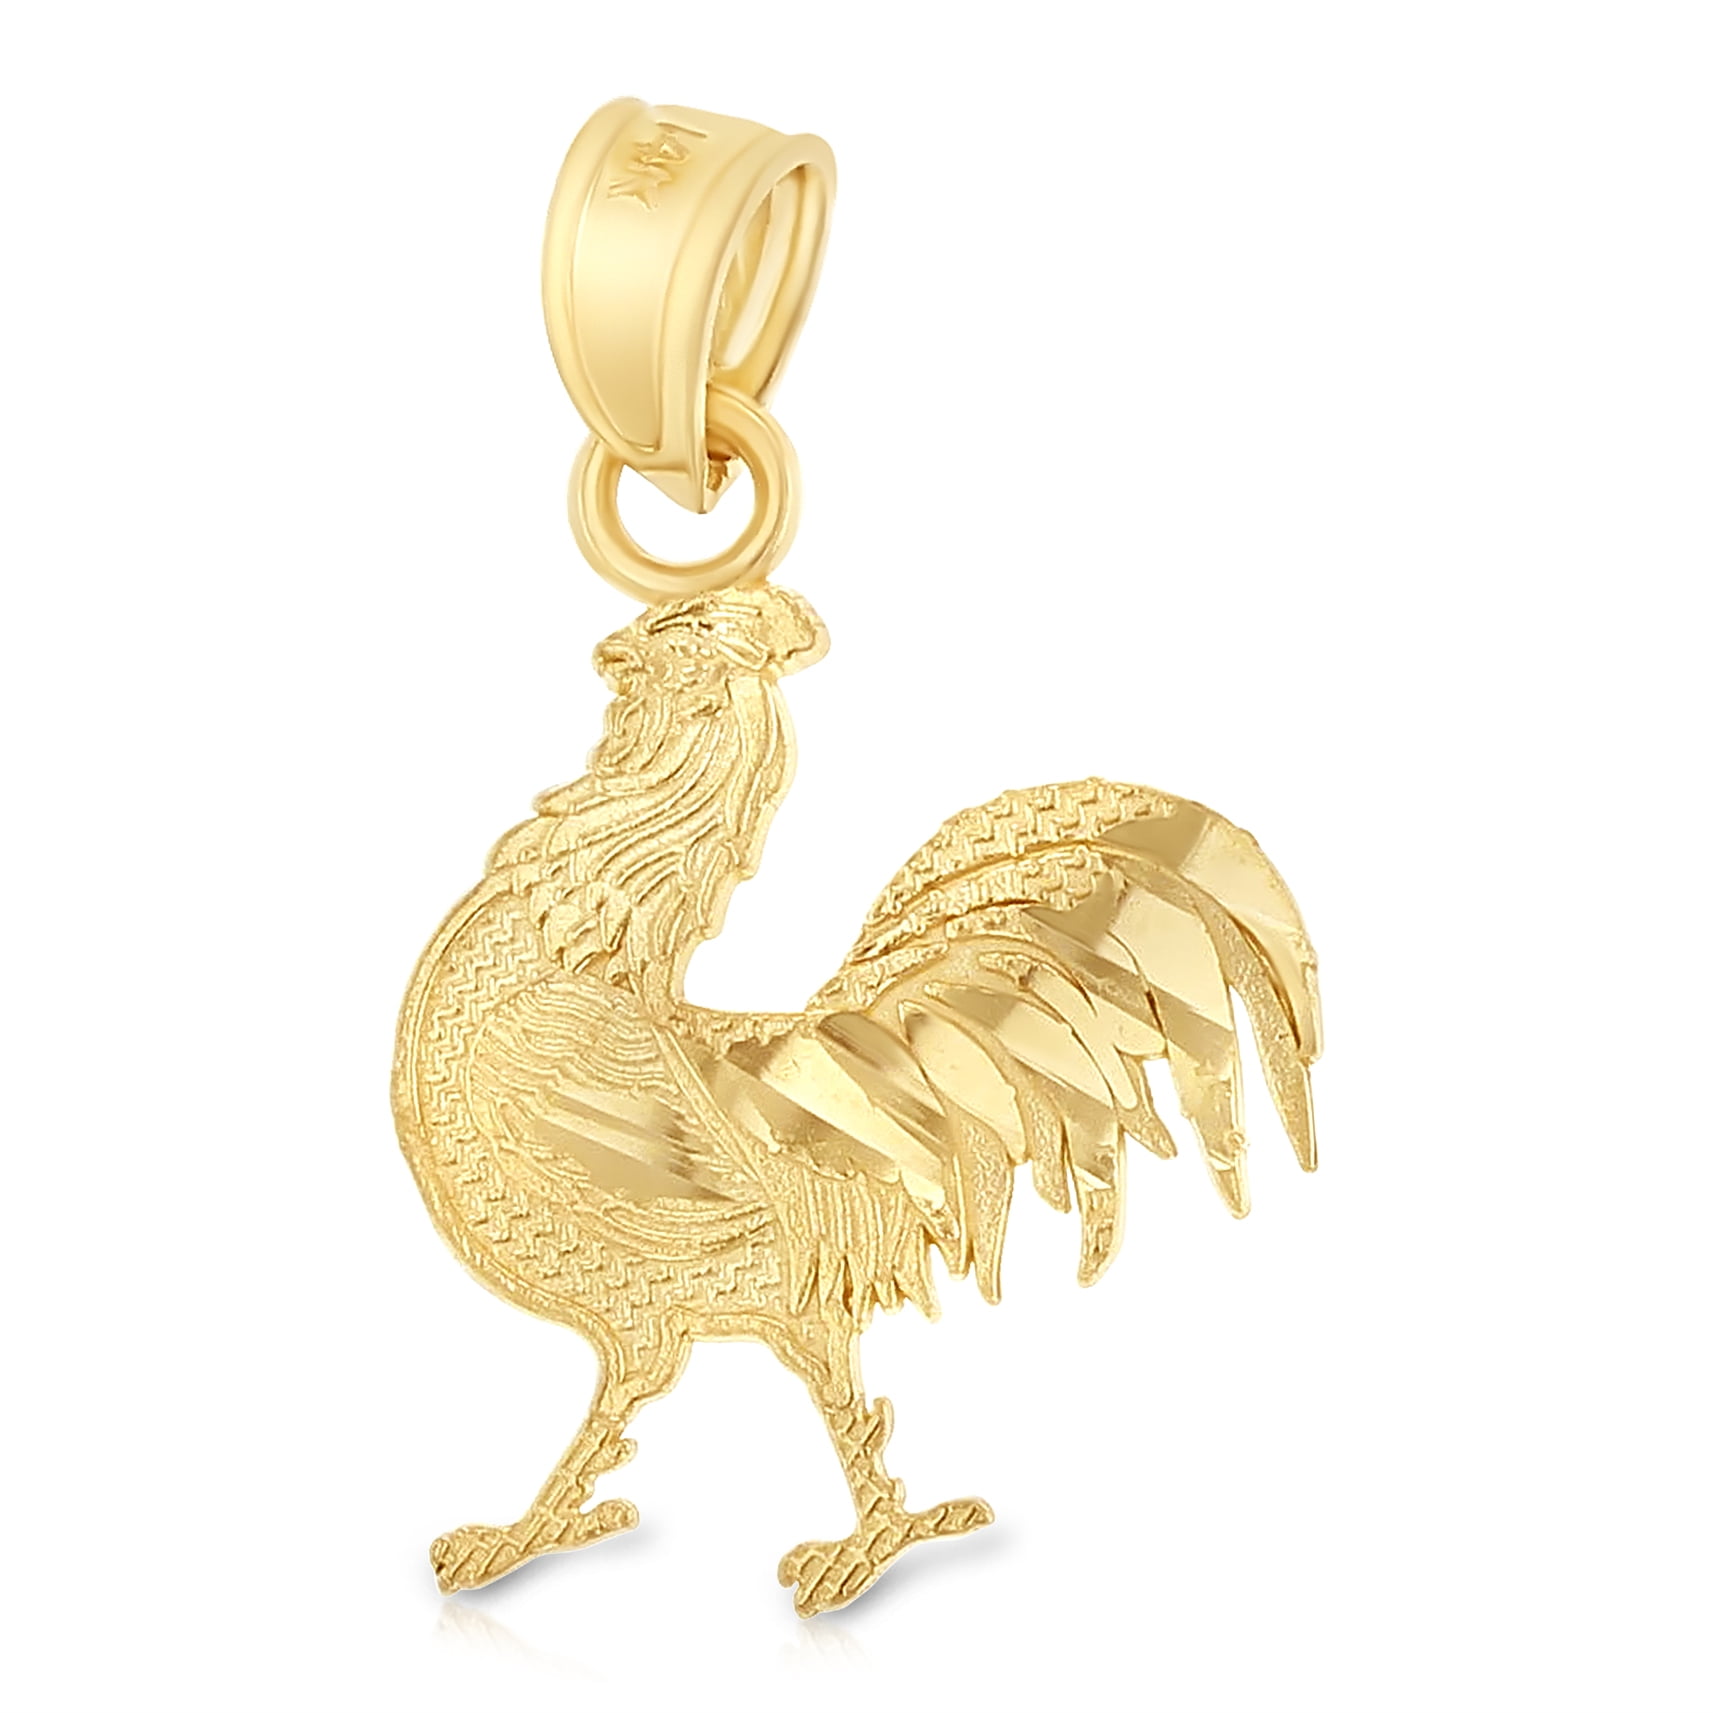 14K Yellow Gold Rooster Charm Pendant with 1.5mm Flat Open Wheat Chain Necklace